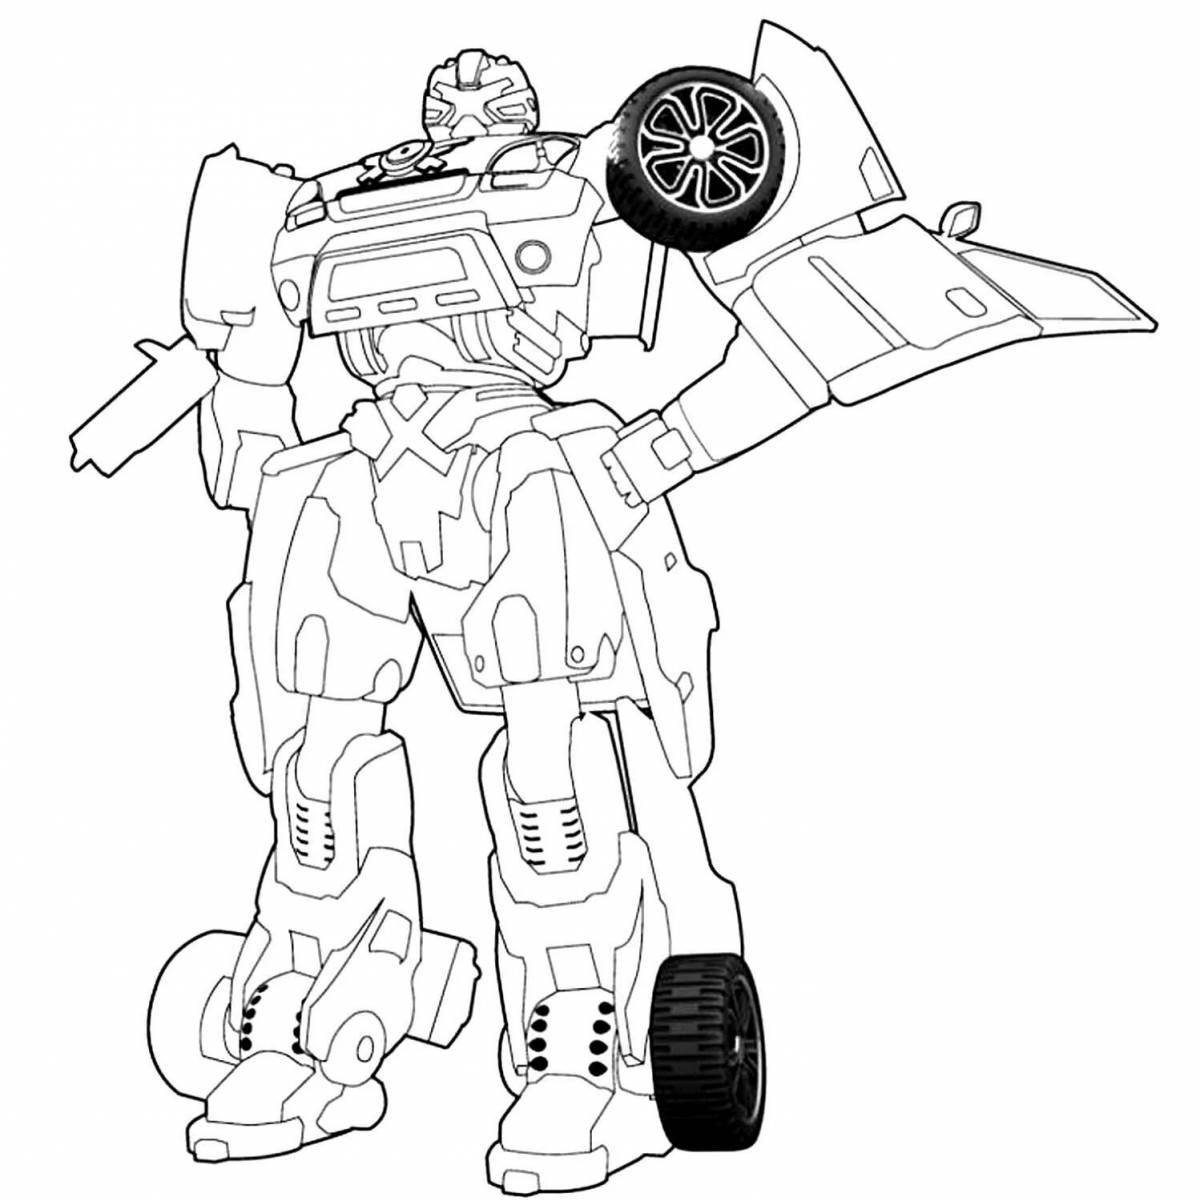 Color tobot and coloring book